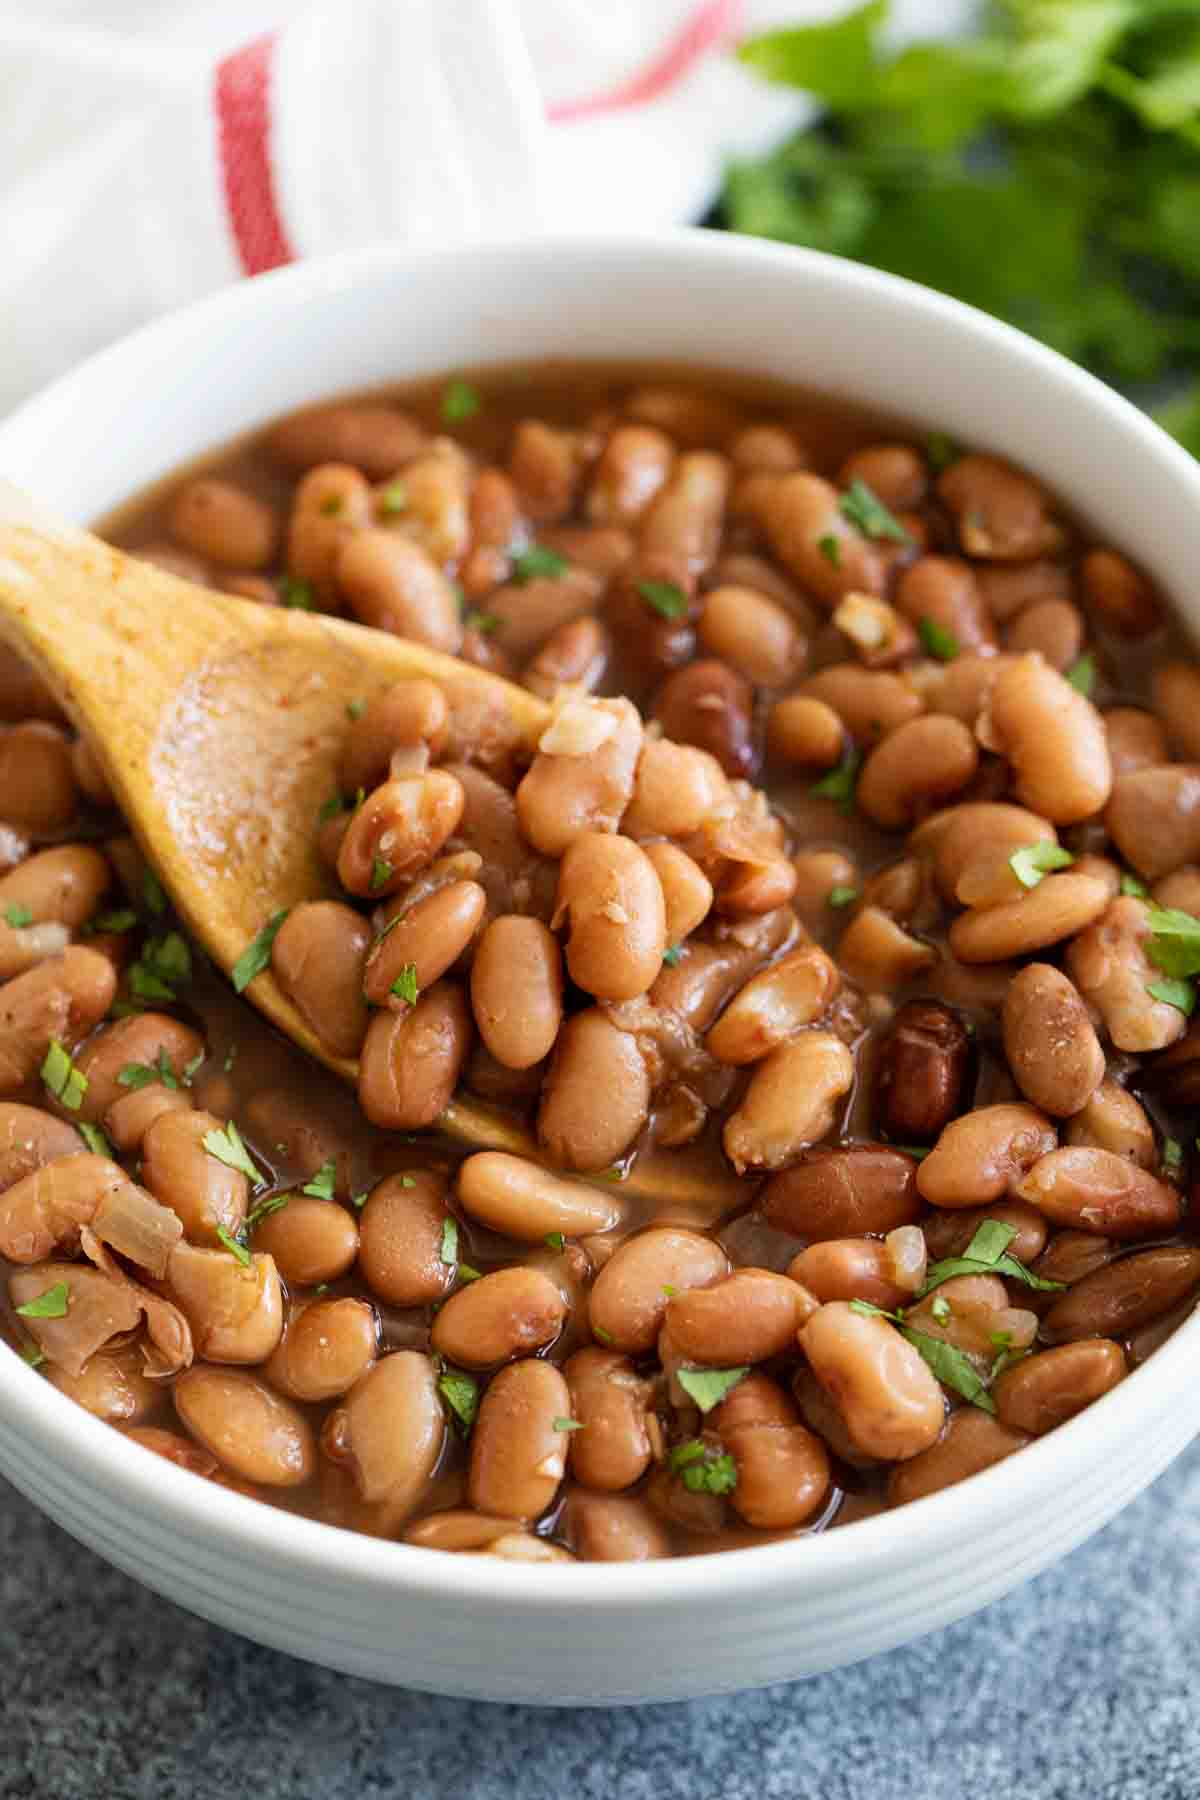 bowl of cooked pinto beans with cilantro on top